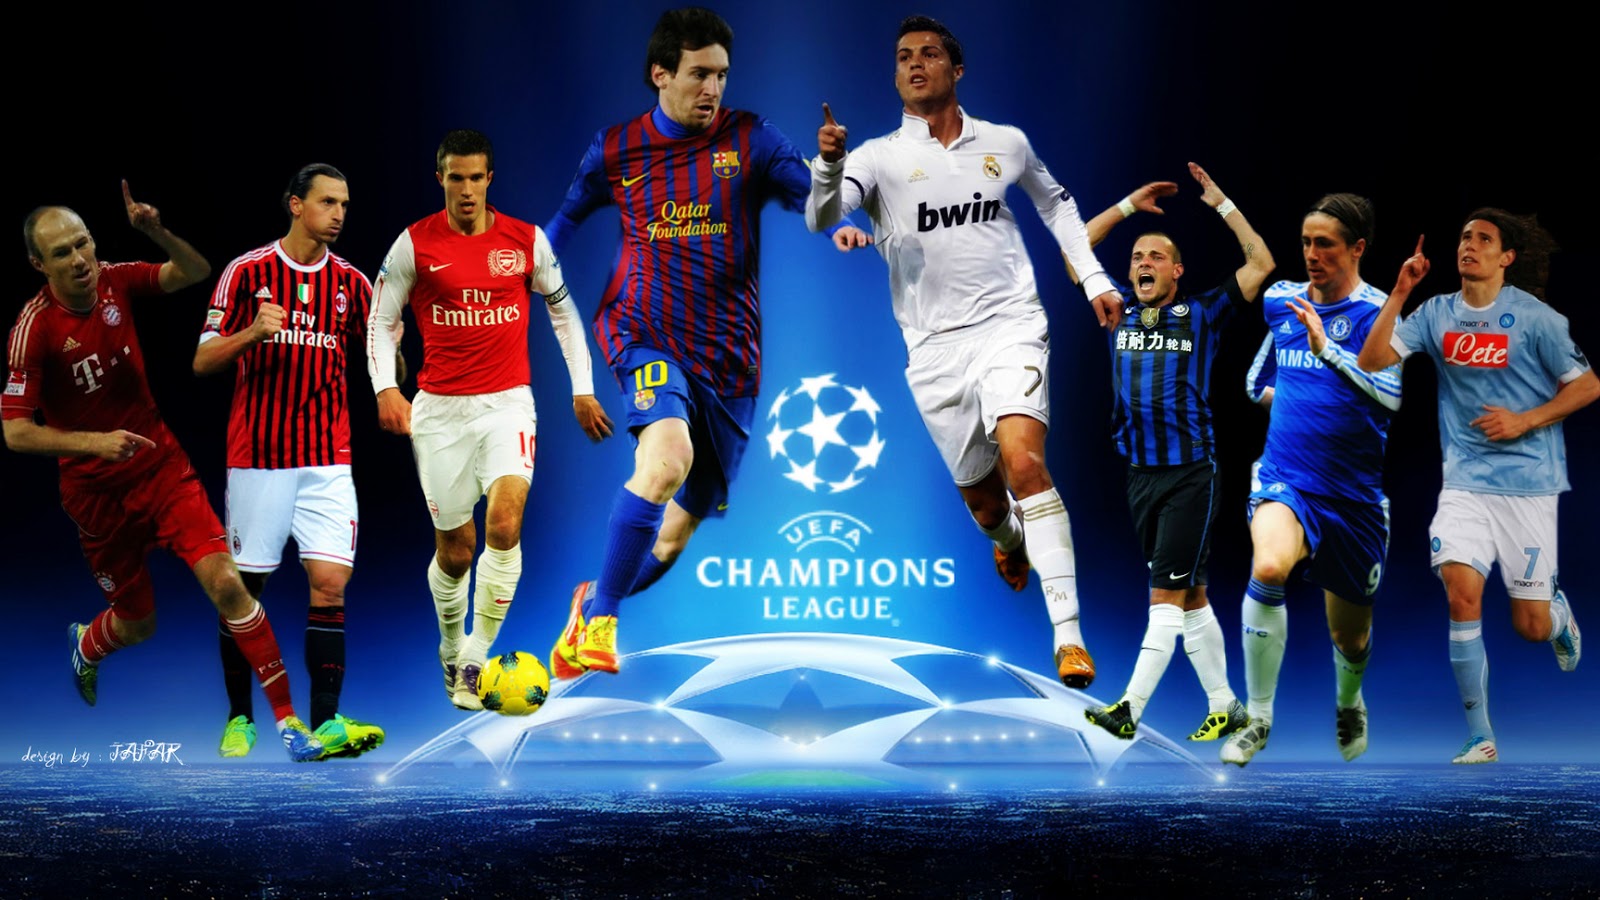 champions league wallpaper hd 1280x800 free download this wallpaper